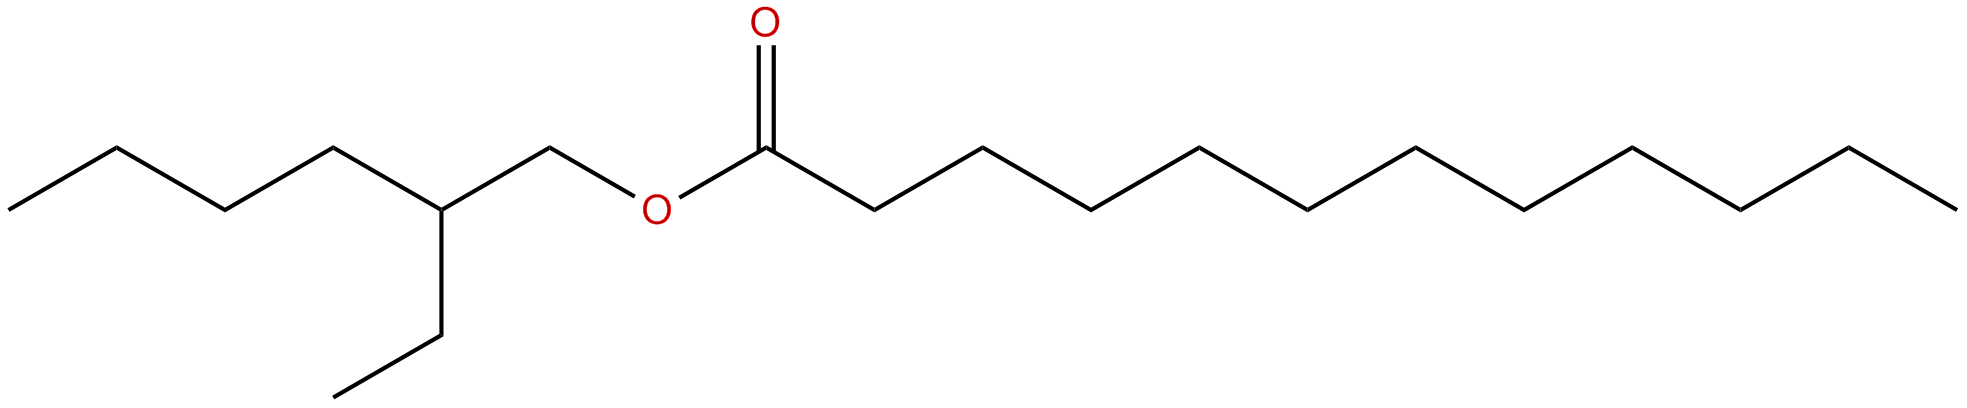 Image of 2-ethylhexyl laurate